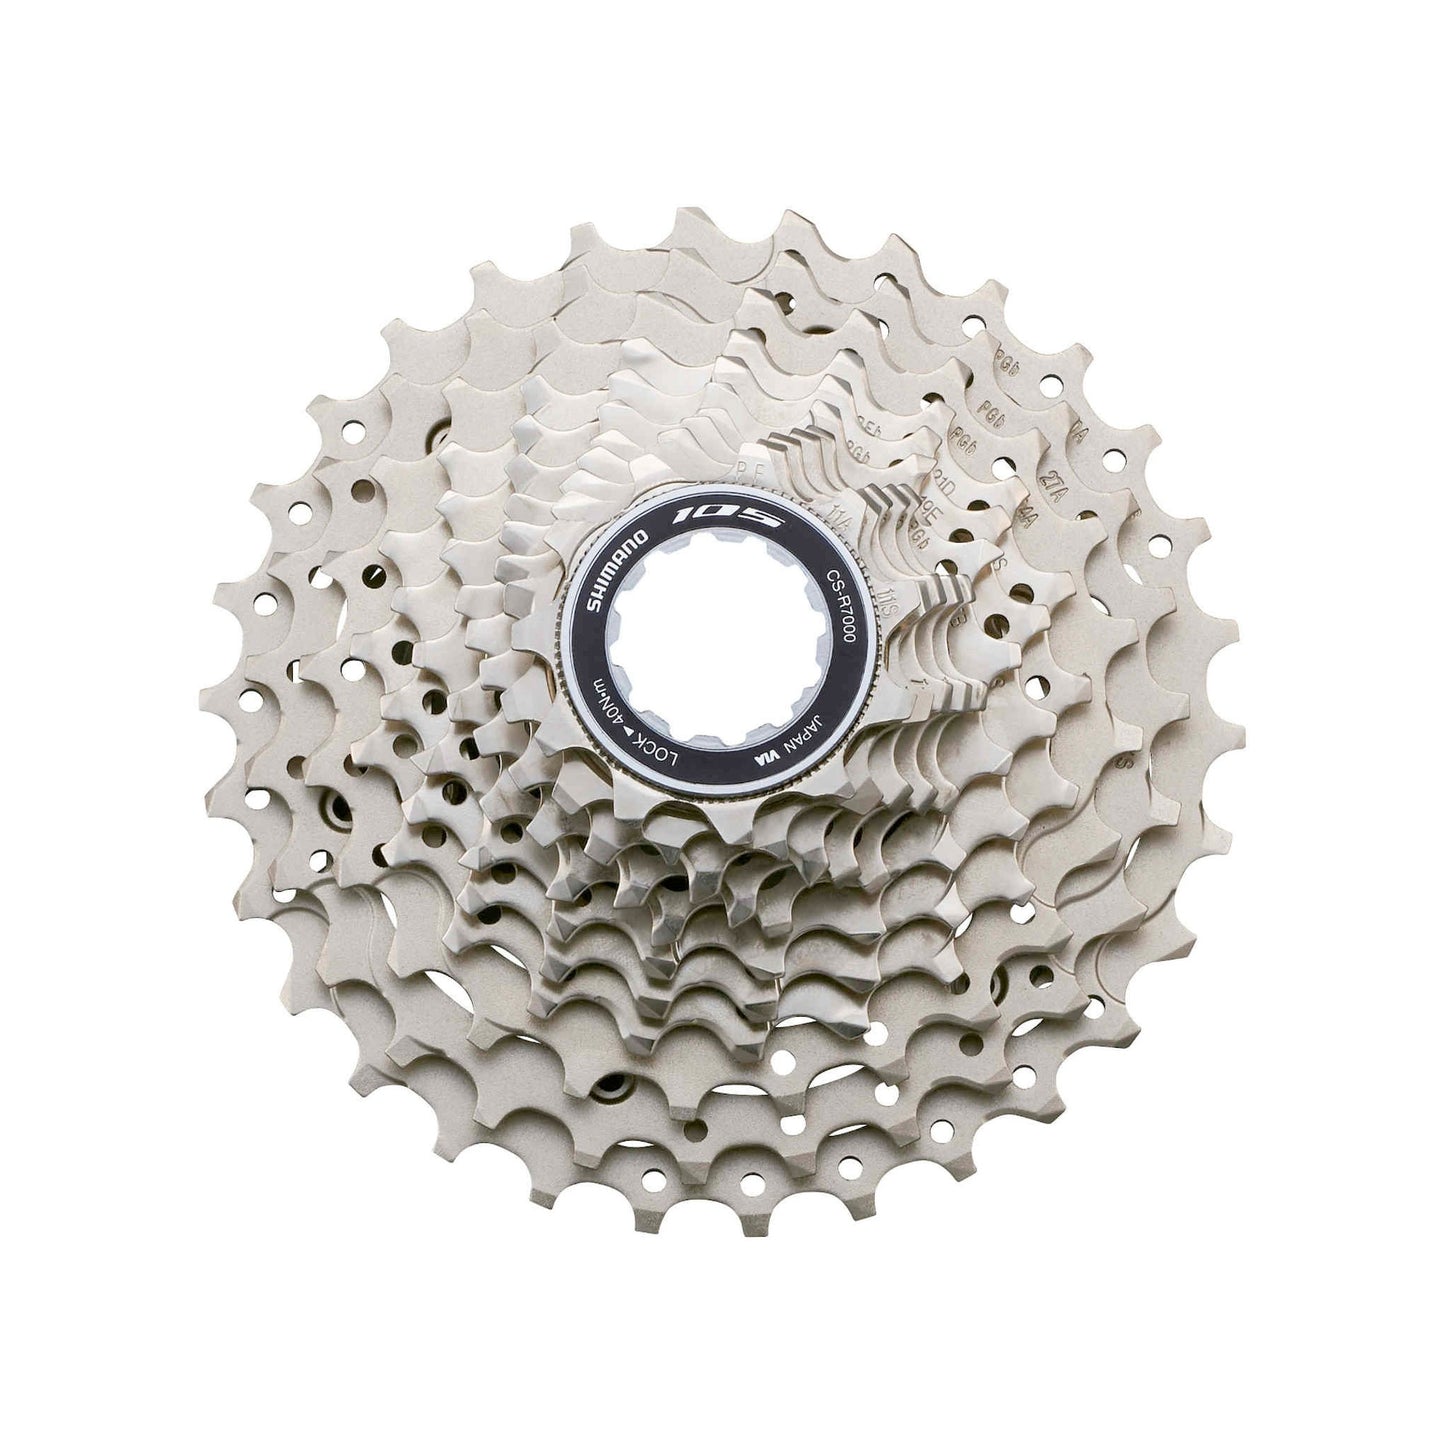 Shimano CS-HG700 105 Cassette 11-34 11 Speed buy online at Woolys Wheels with free delivery